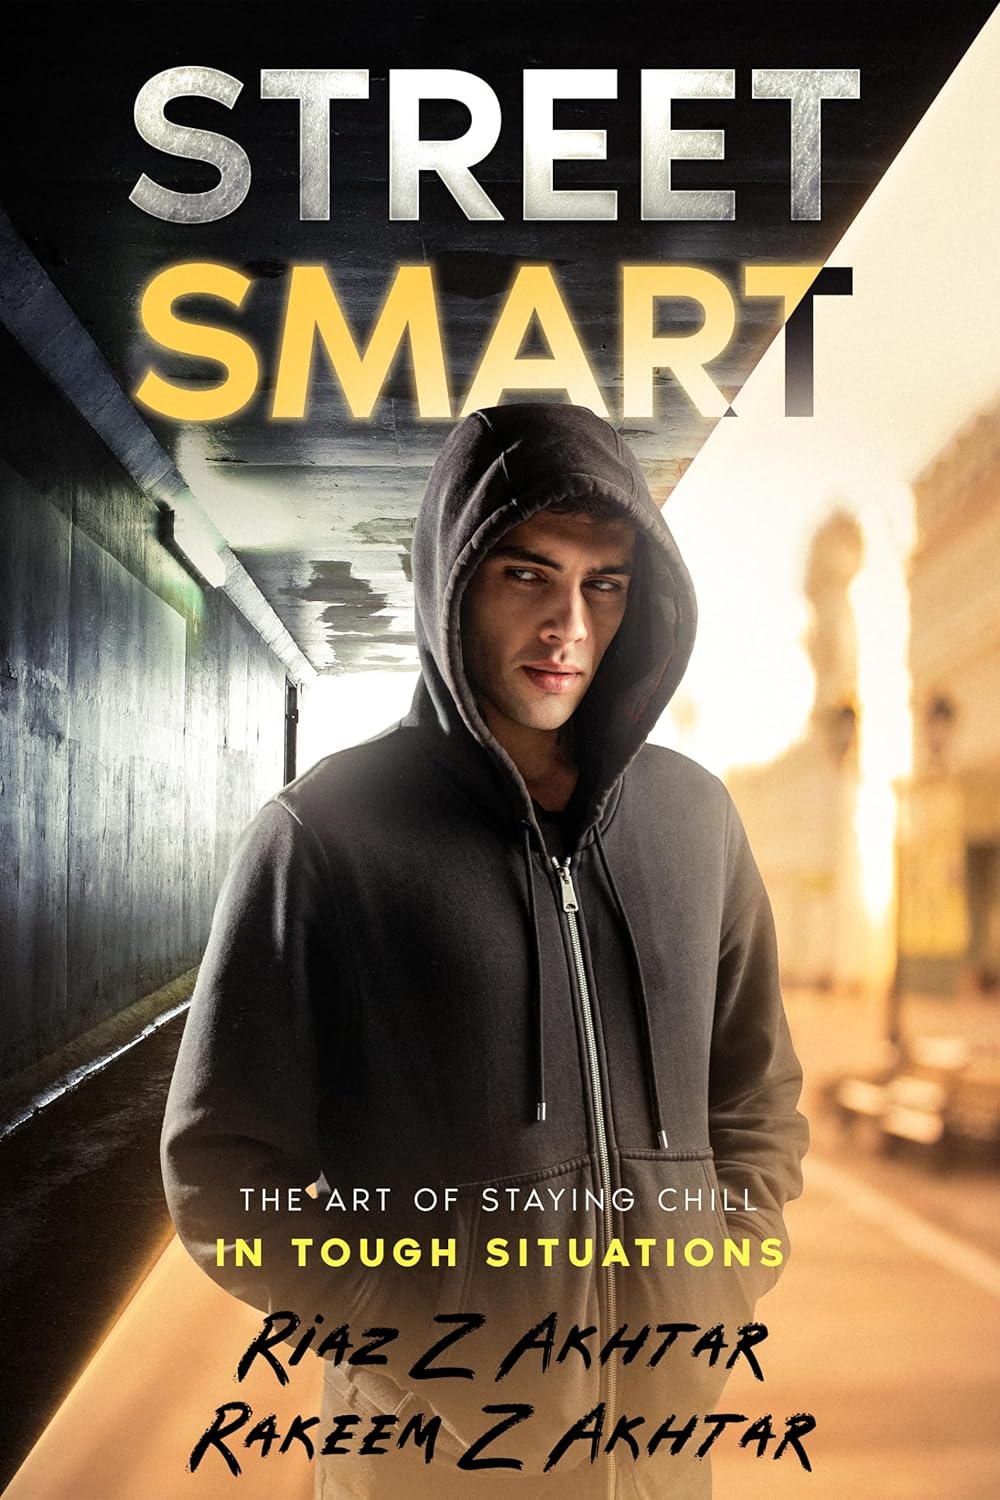 Street Smart: The Art of Staying Chill in Tough Situations by Riaz Akhtar & Rakeem Akhtar